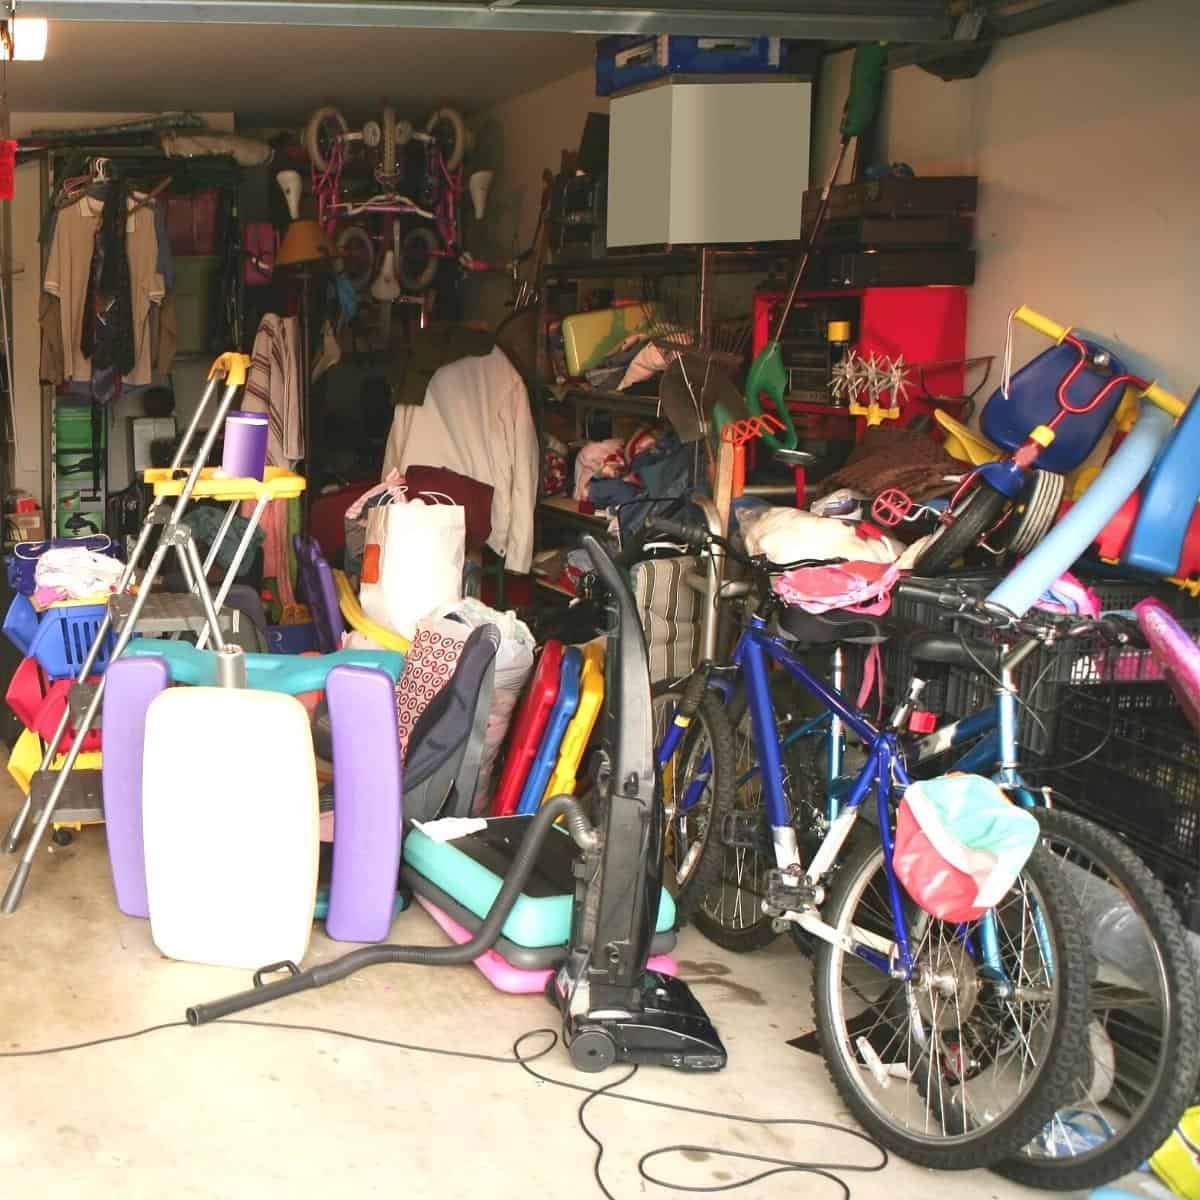 cluttered garage with bicycles